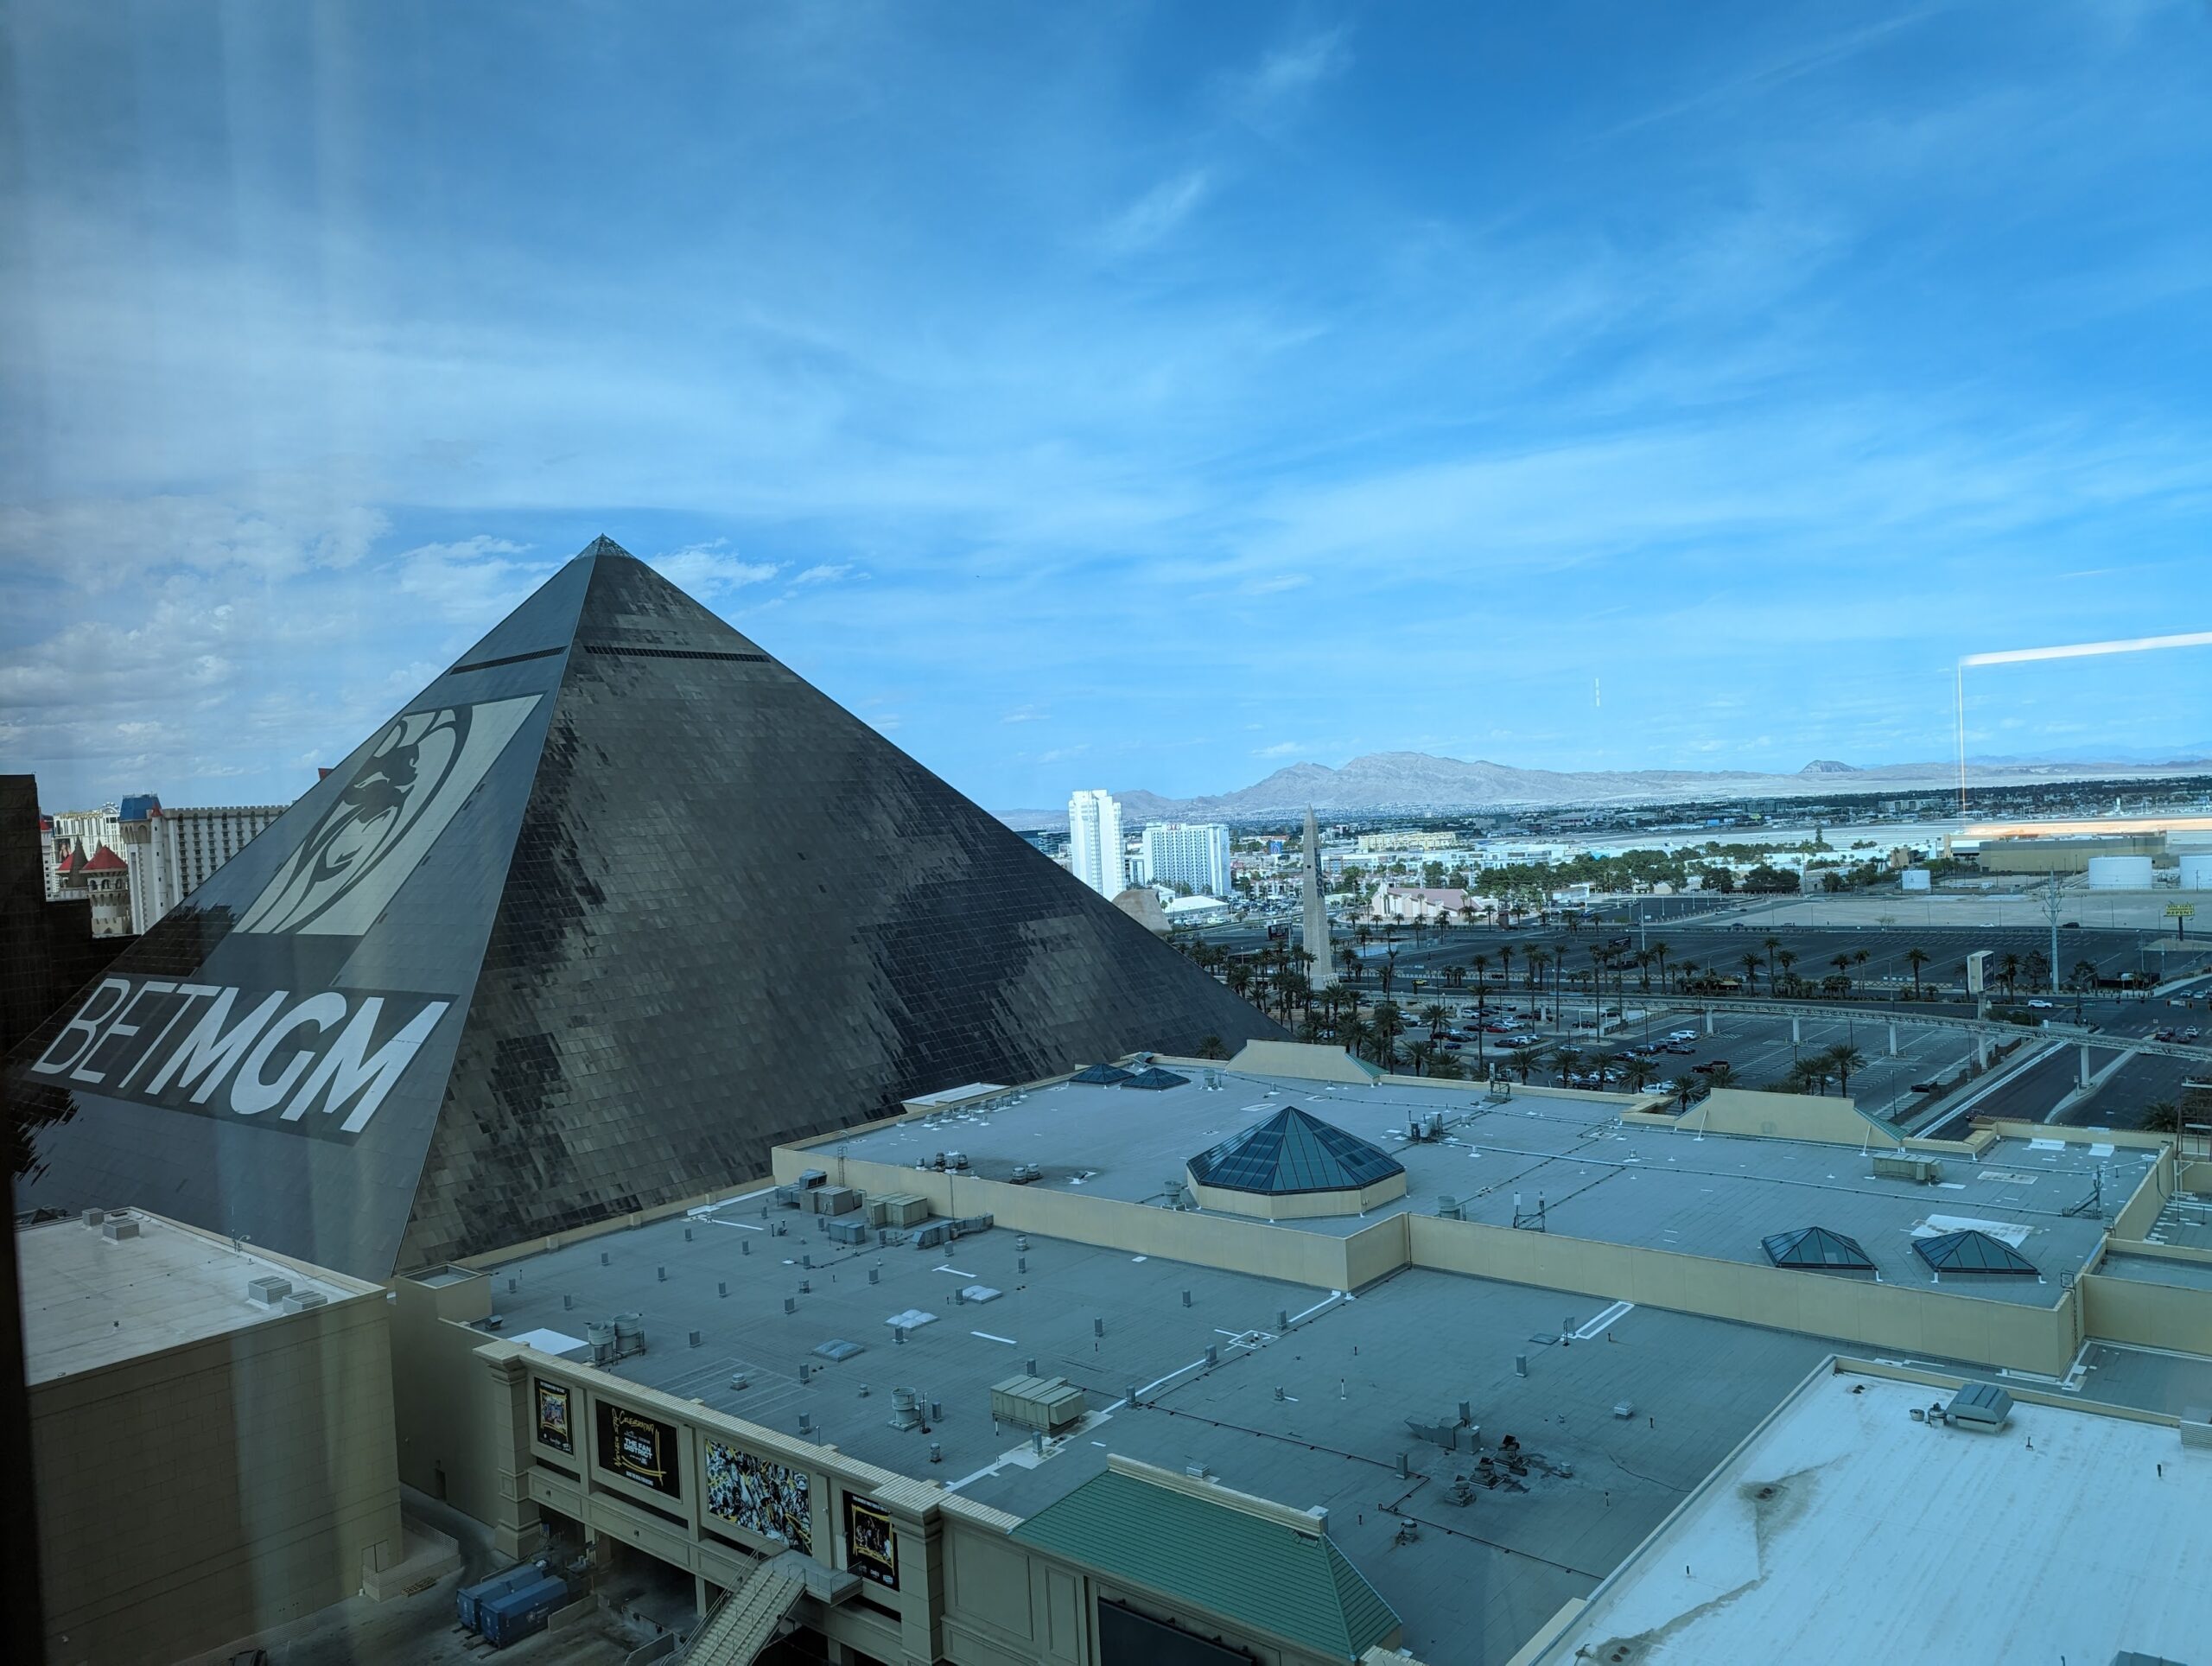 a pyramid shaped building with a city in the background